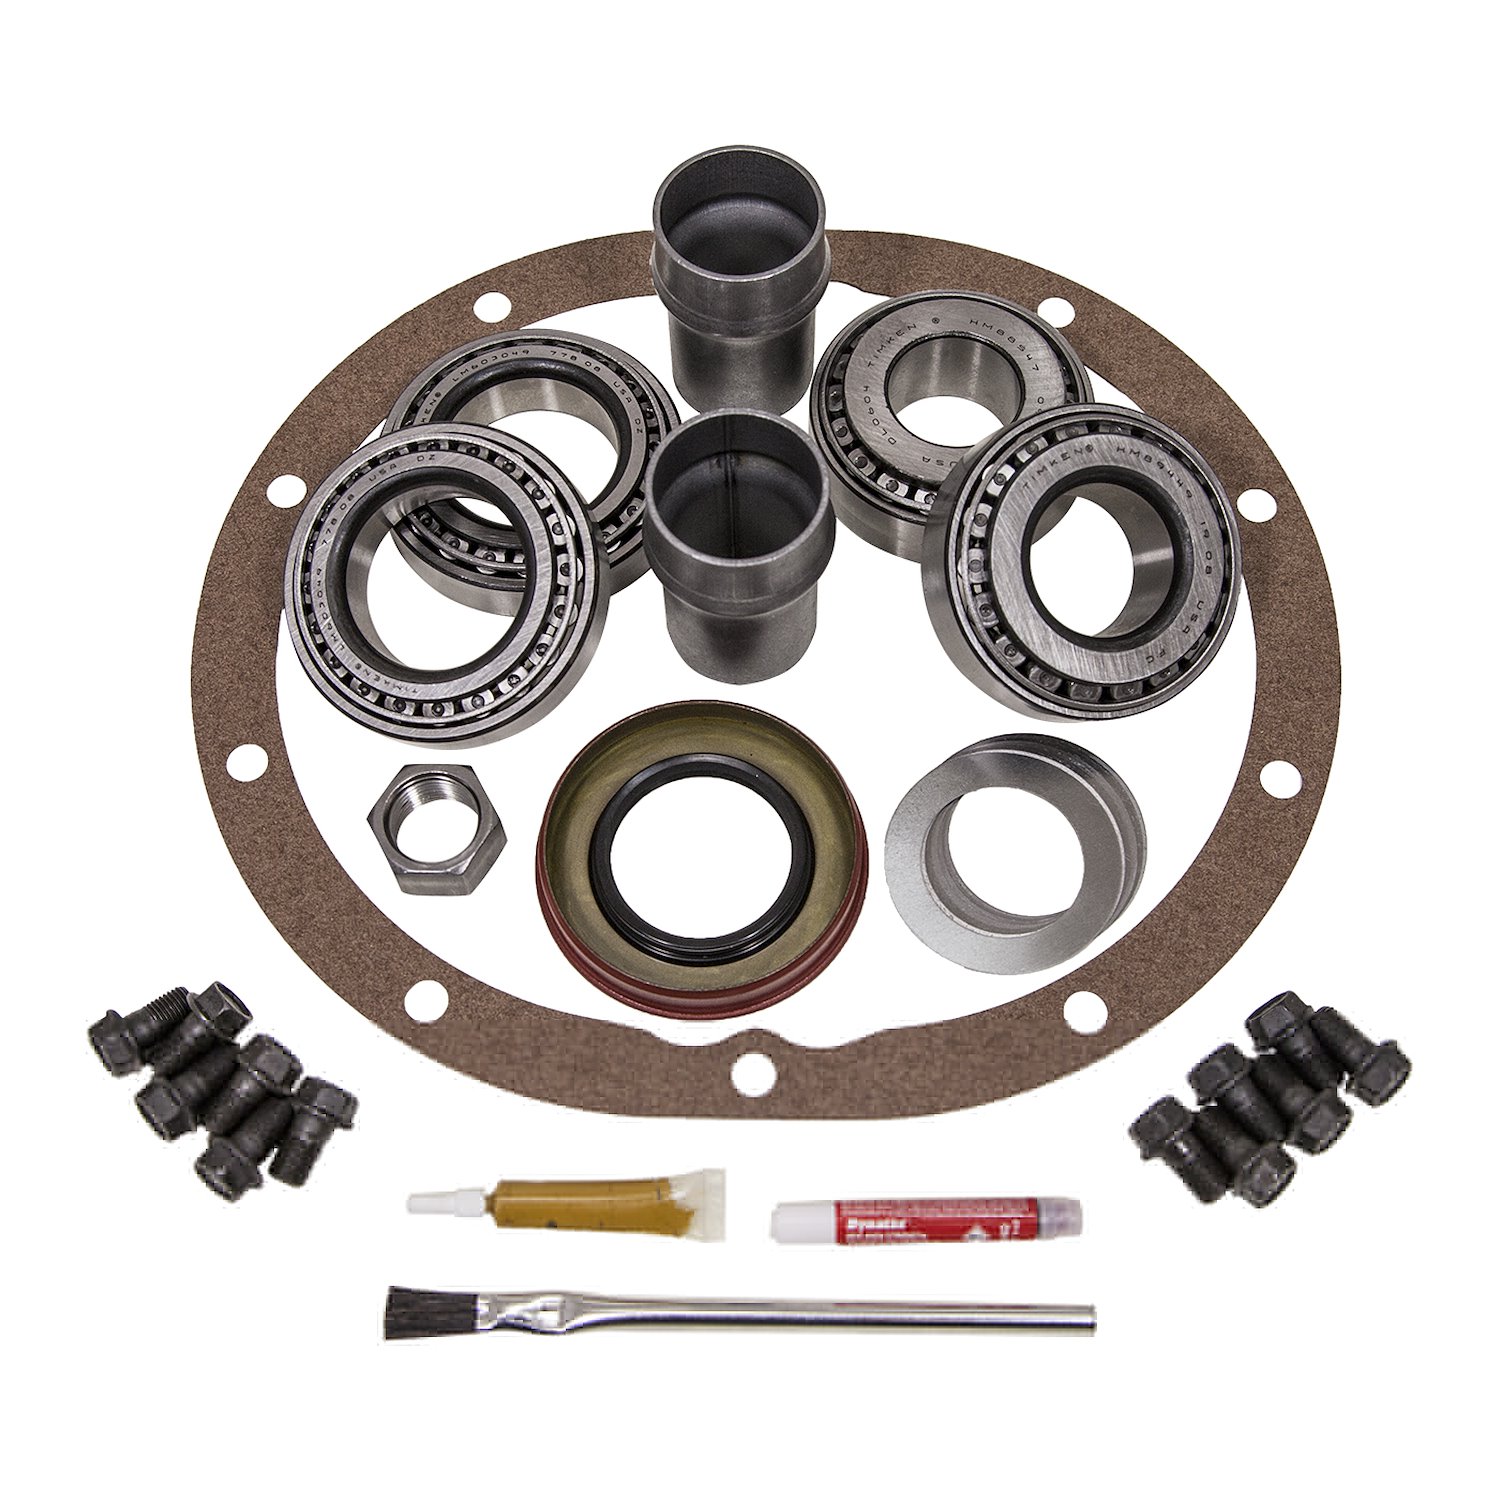 Master Overhaul Kit for 1955-1964 GM 55P Passenger Car and 55T Truck Differential